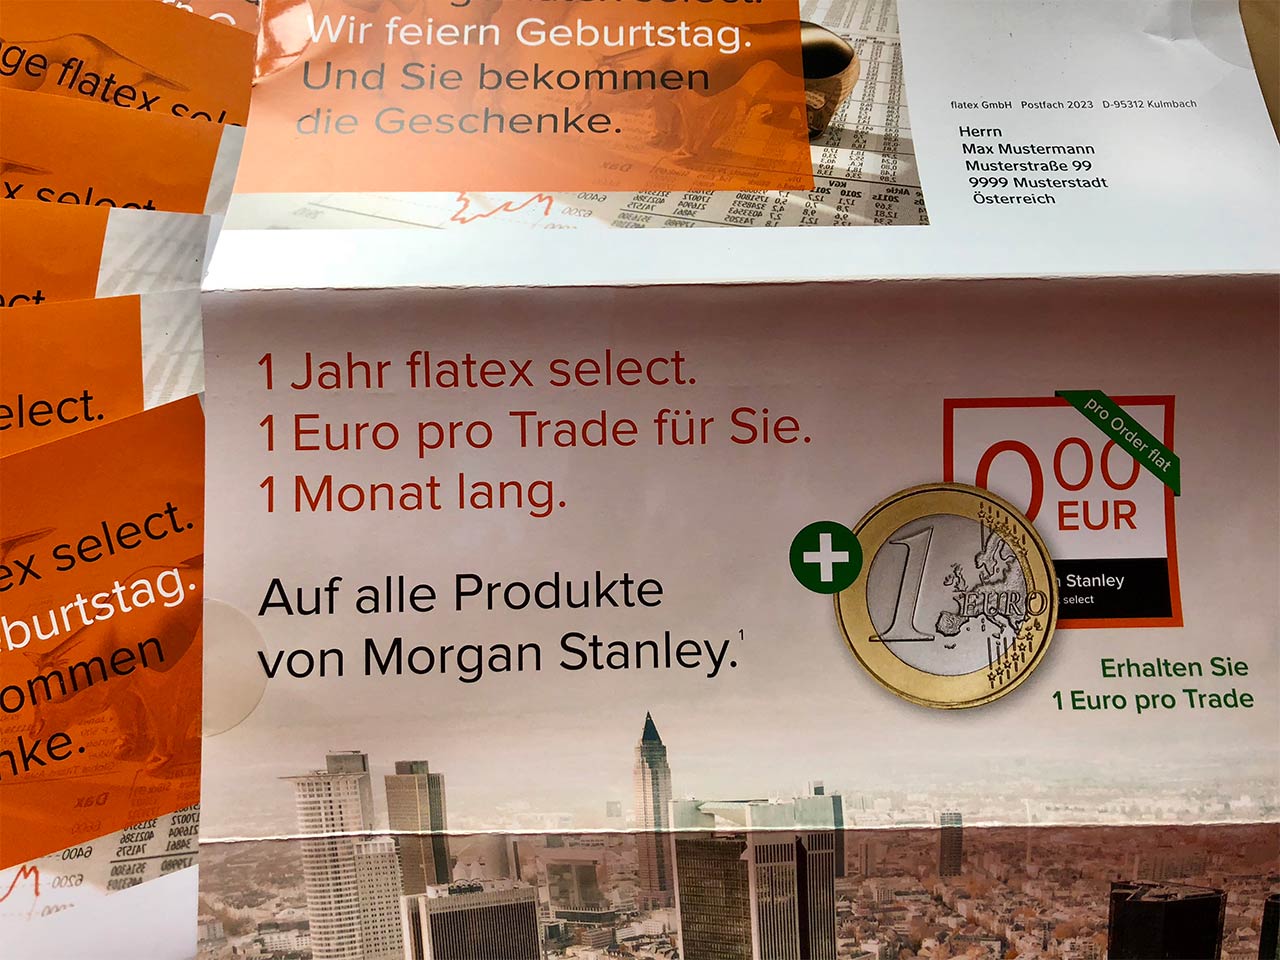 flatex 365 Tage select Direct Mailing Mehr für die Märkte More for the markets